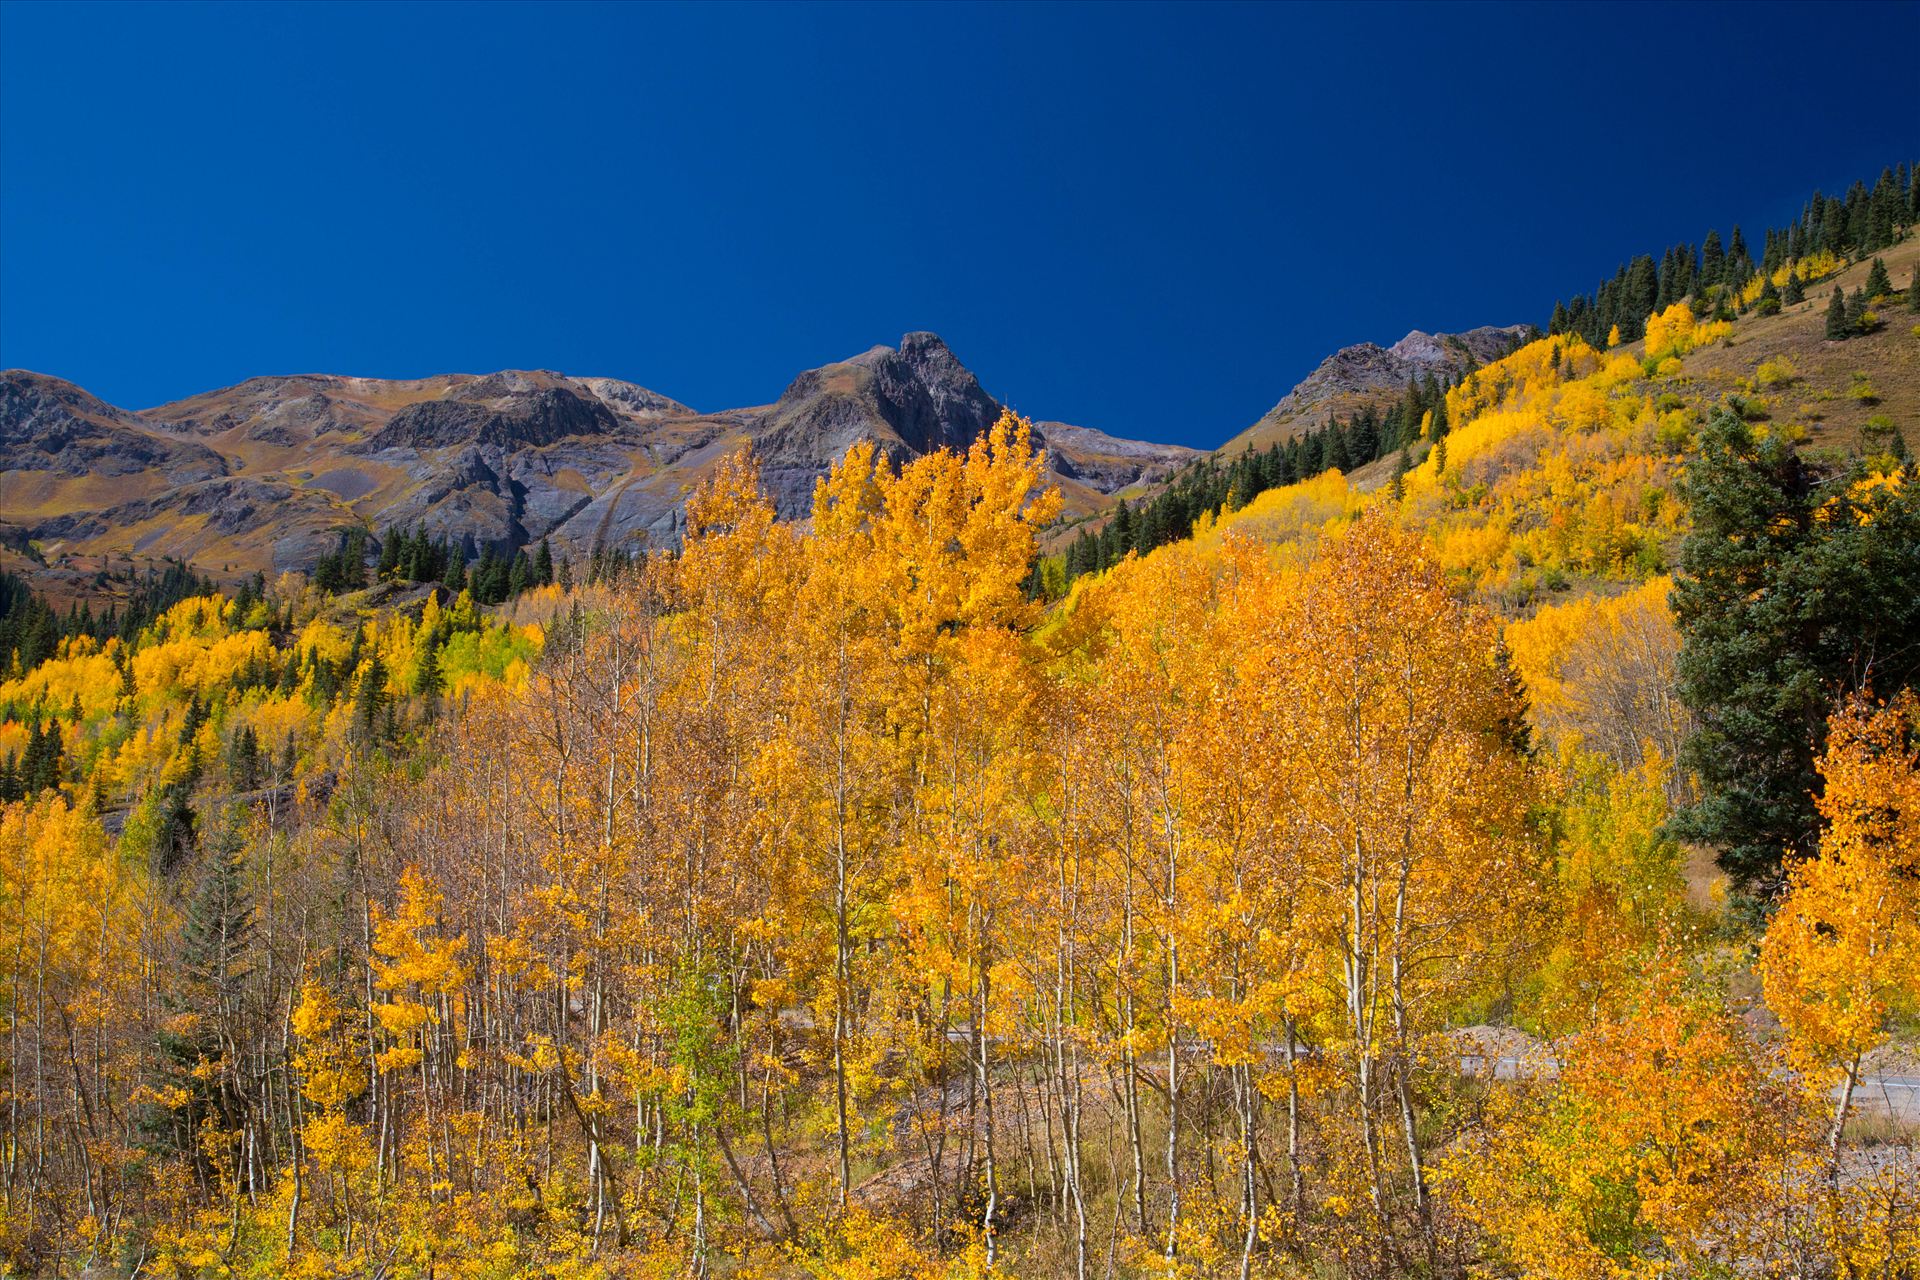 Million Dollar Highway - A quick shot of the aspens from the million dollar highway between Ourway and Silverton, Colorado. by Scott Smith Photos